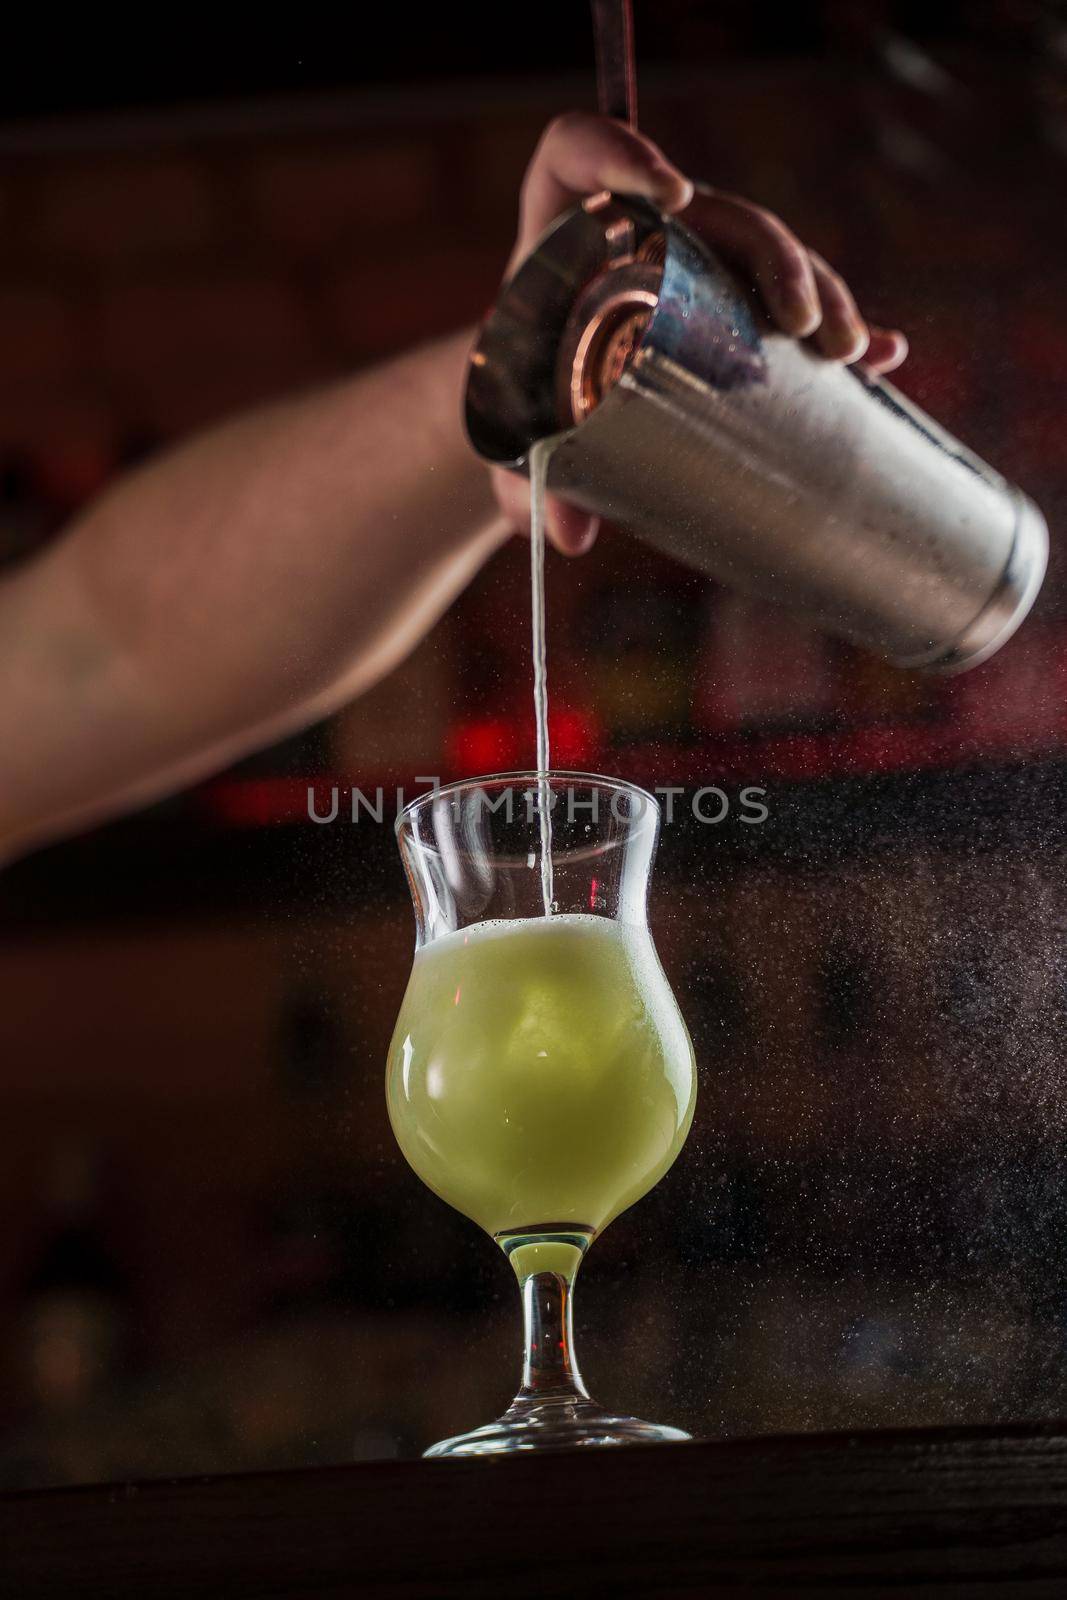 Bartender sprinkles on illuminated glass with bright green cold cocktail on bar counter and makes fire flame over it by Rabizo